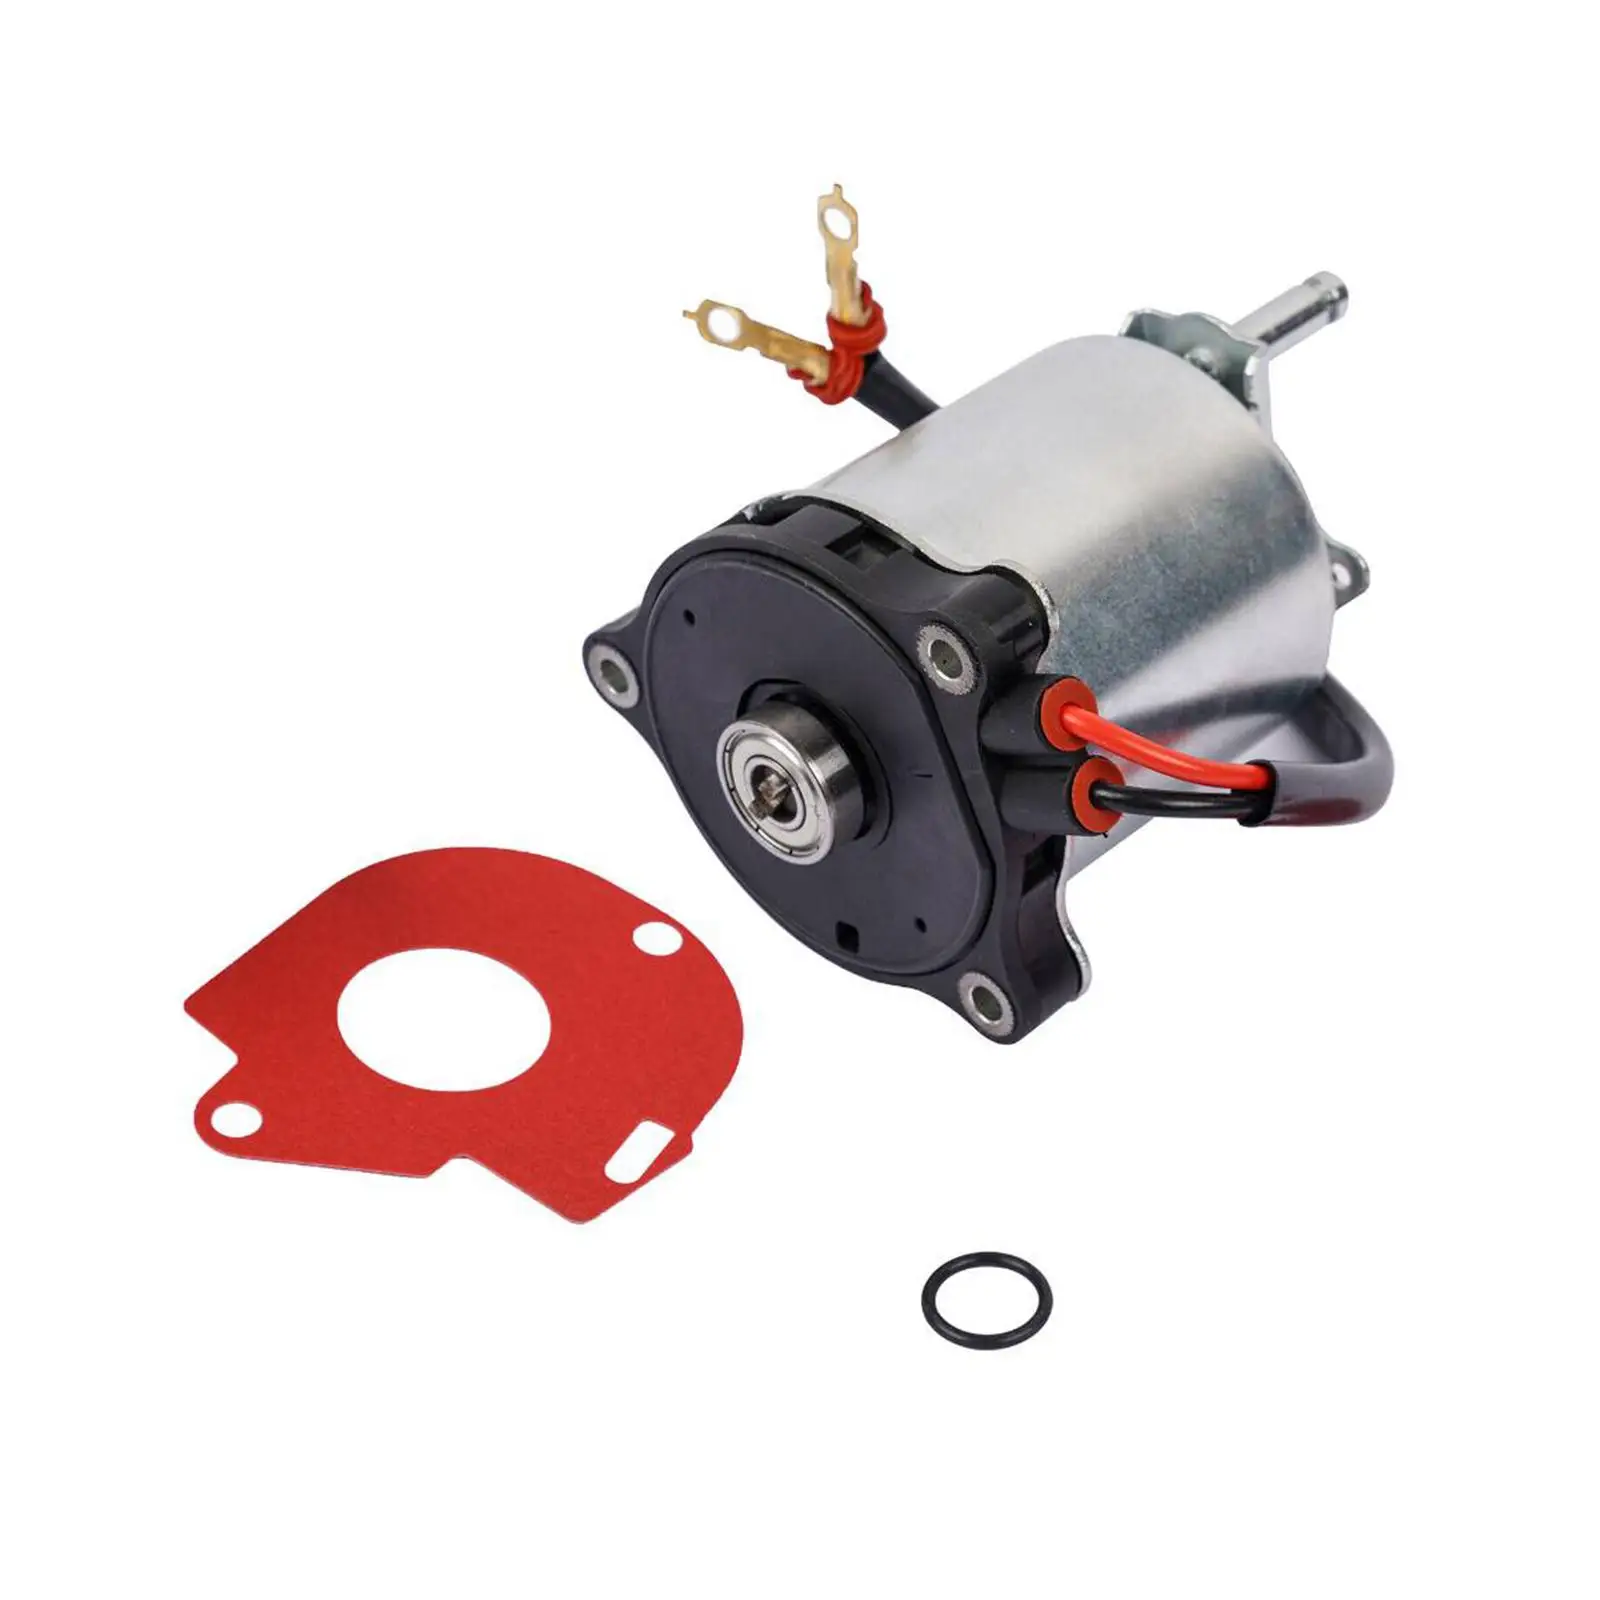 Brake Booster Pump Motor Installation 4796060050 Accessory High Quality Directly Replace for LX450D LX570 Gx470 Gx460